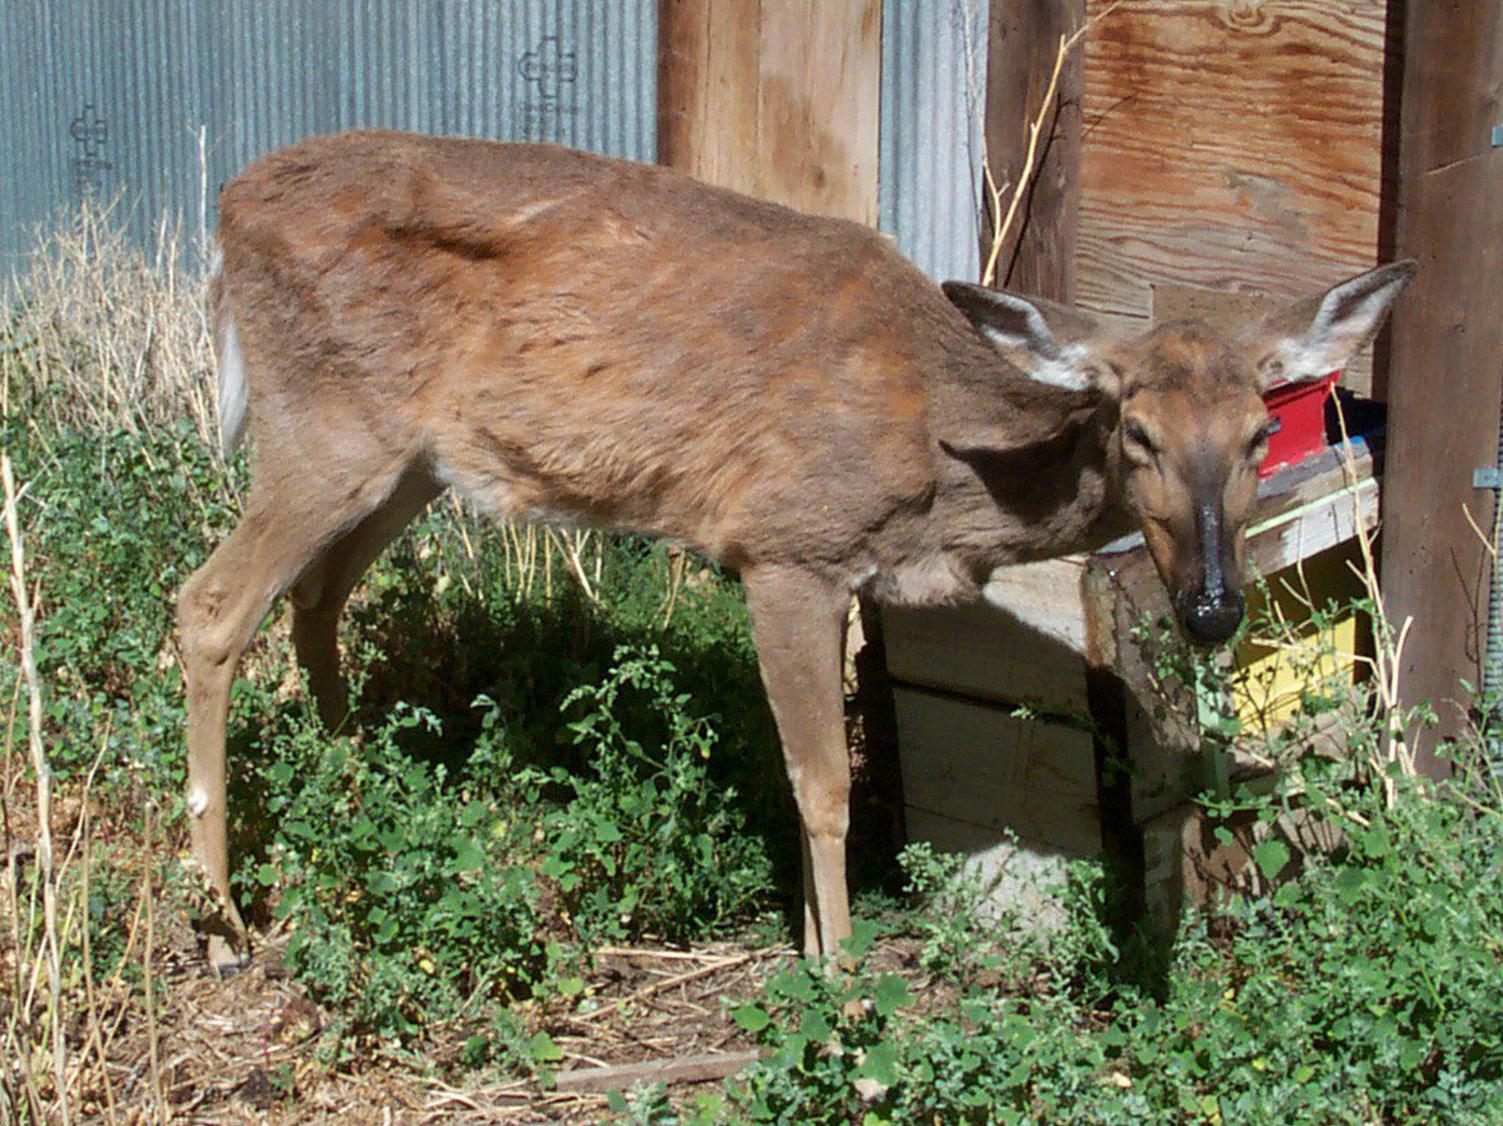 This Wyoming deer suffers from chronic wasting disease, a highly contagious illness that is now present in 23 states. Although the disease is undocumented in Mississippi, it poses a real, potential threat to the state’s deer herd. (Photo Credit: Wyoming Game and Fish Department and the CWD Alliance)